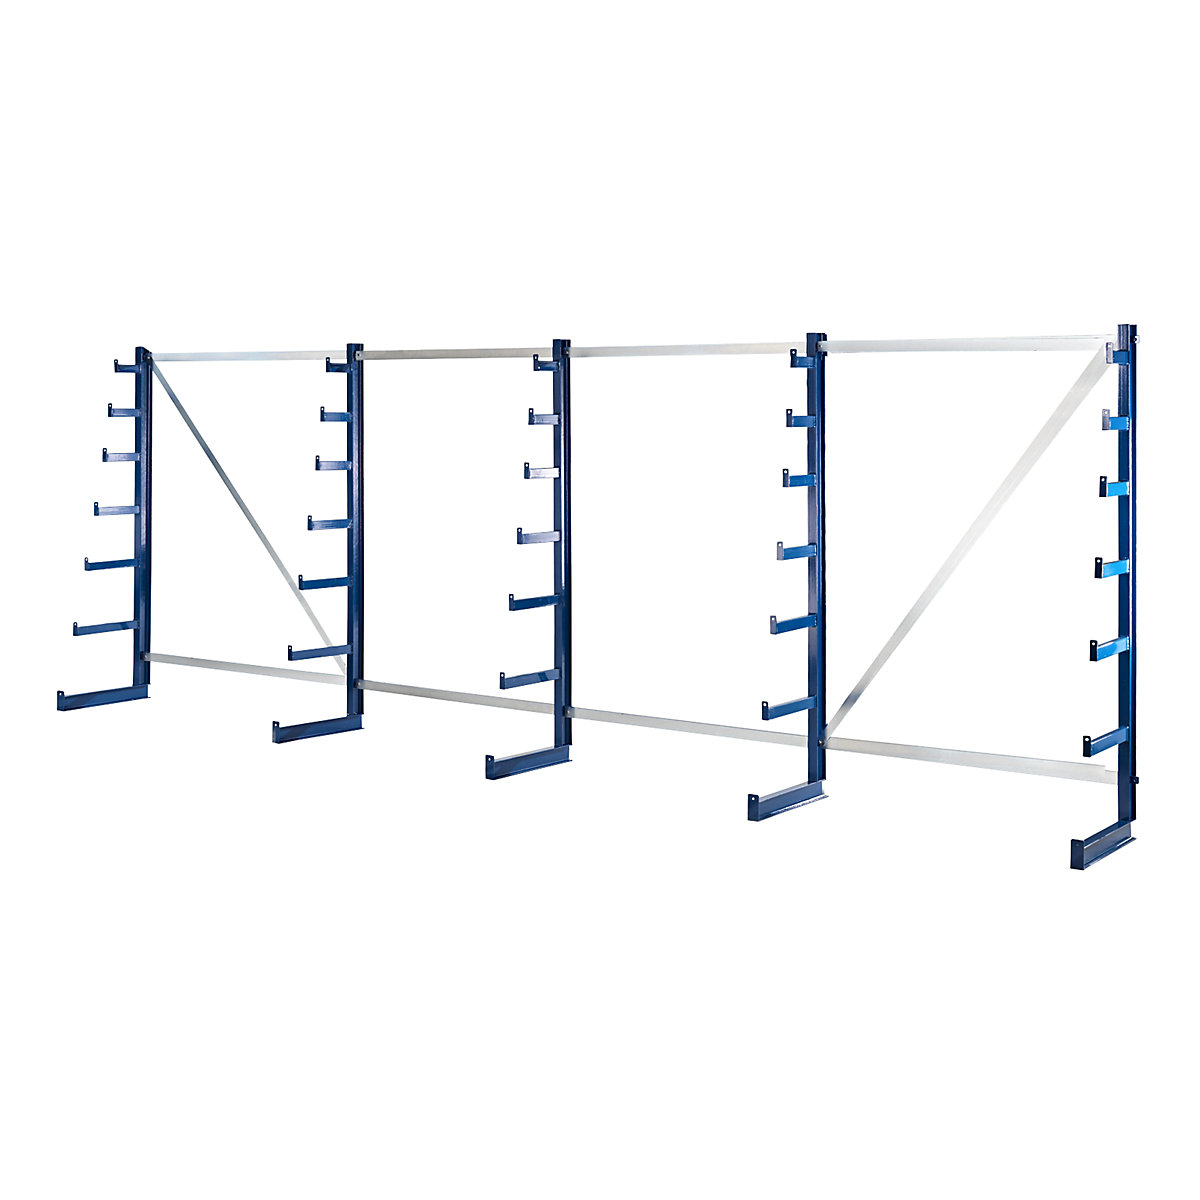 Cantilever racking unit with cantilever arms which taper towards the top – eurokraft pro